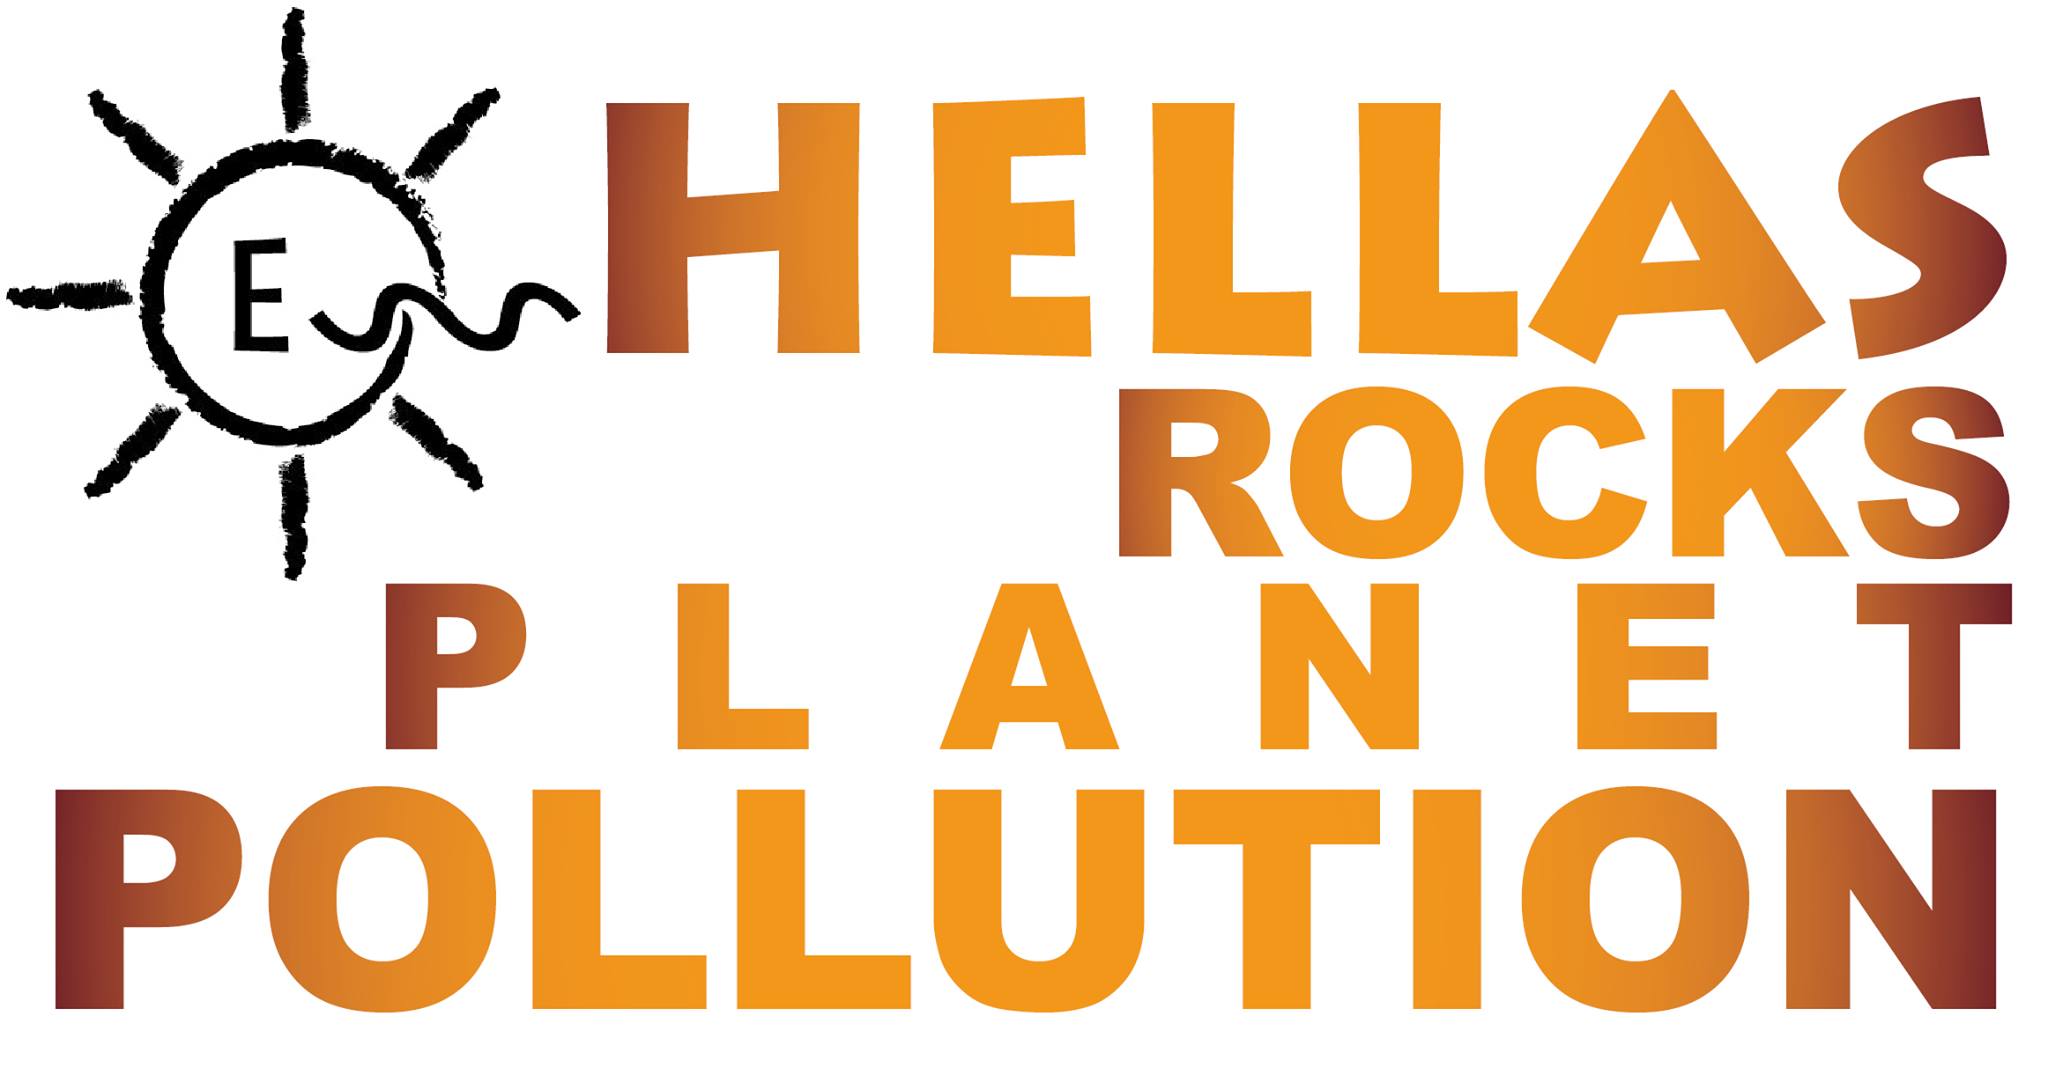 Join The Movement
Hellas
Rocks
Planet
Pollution